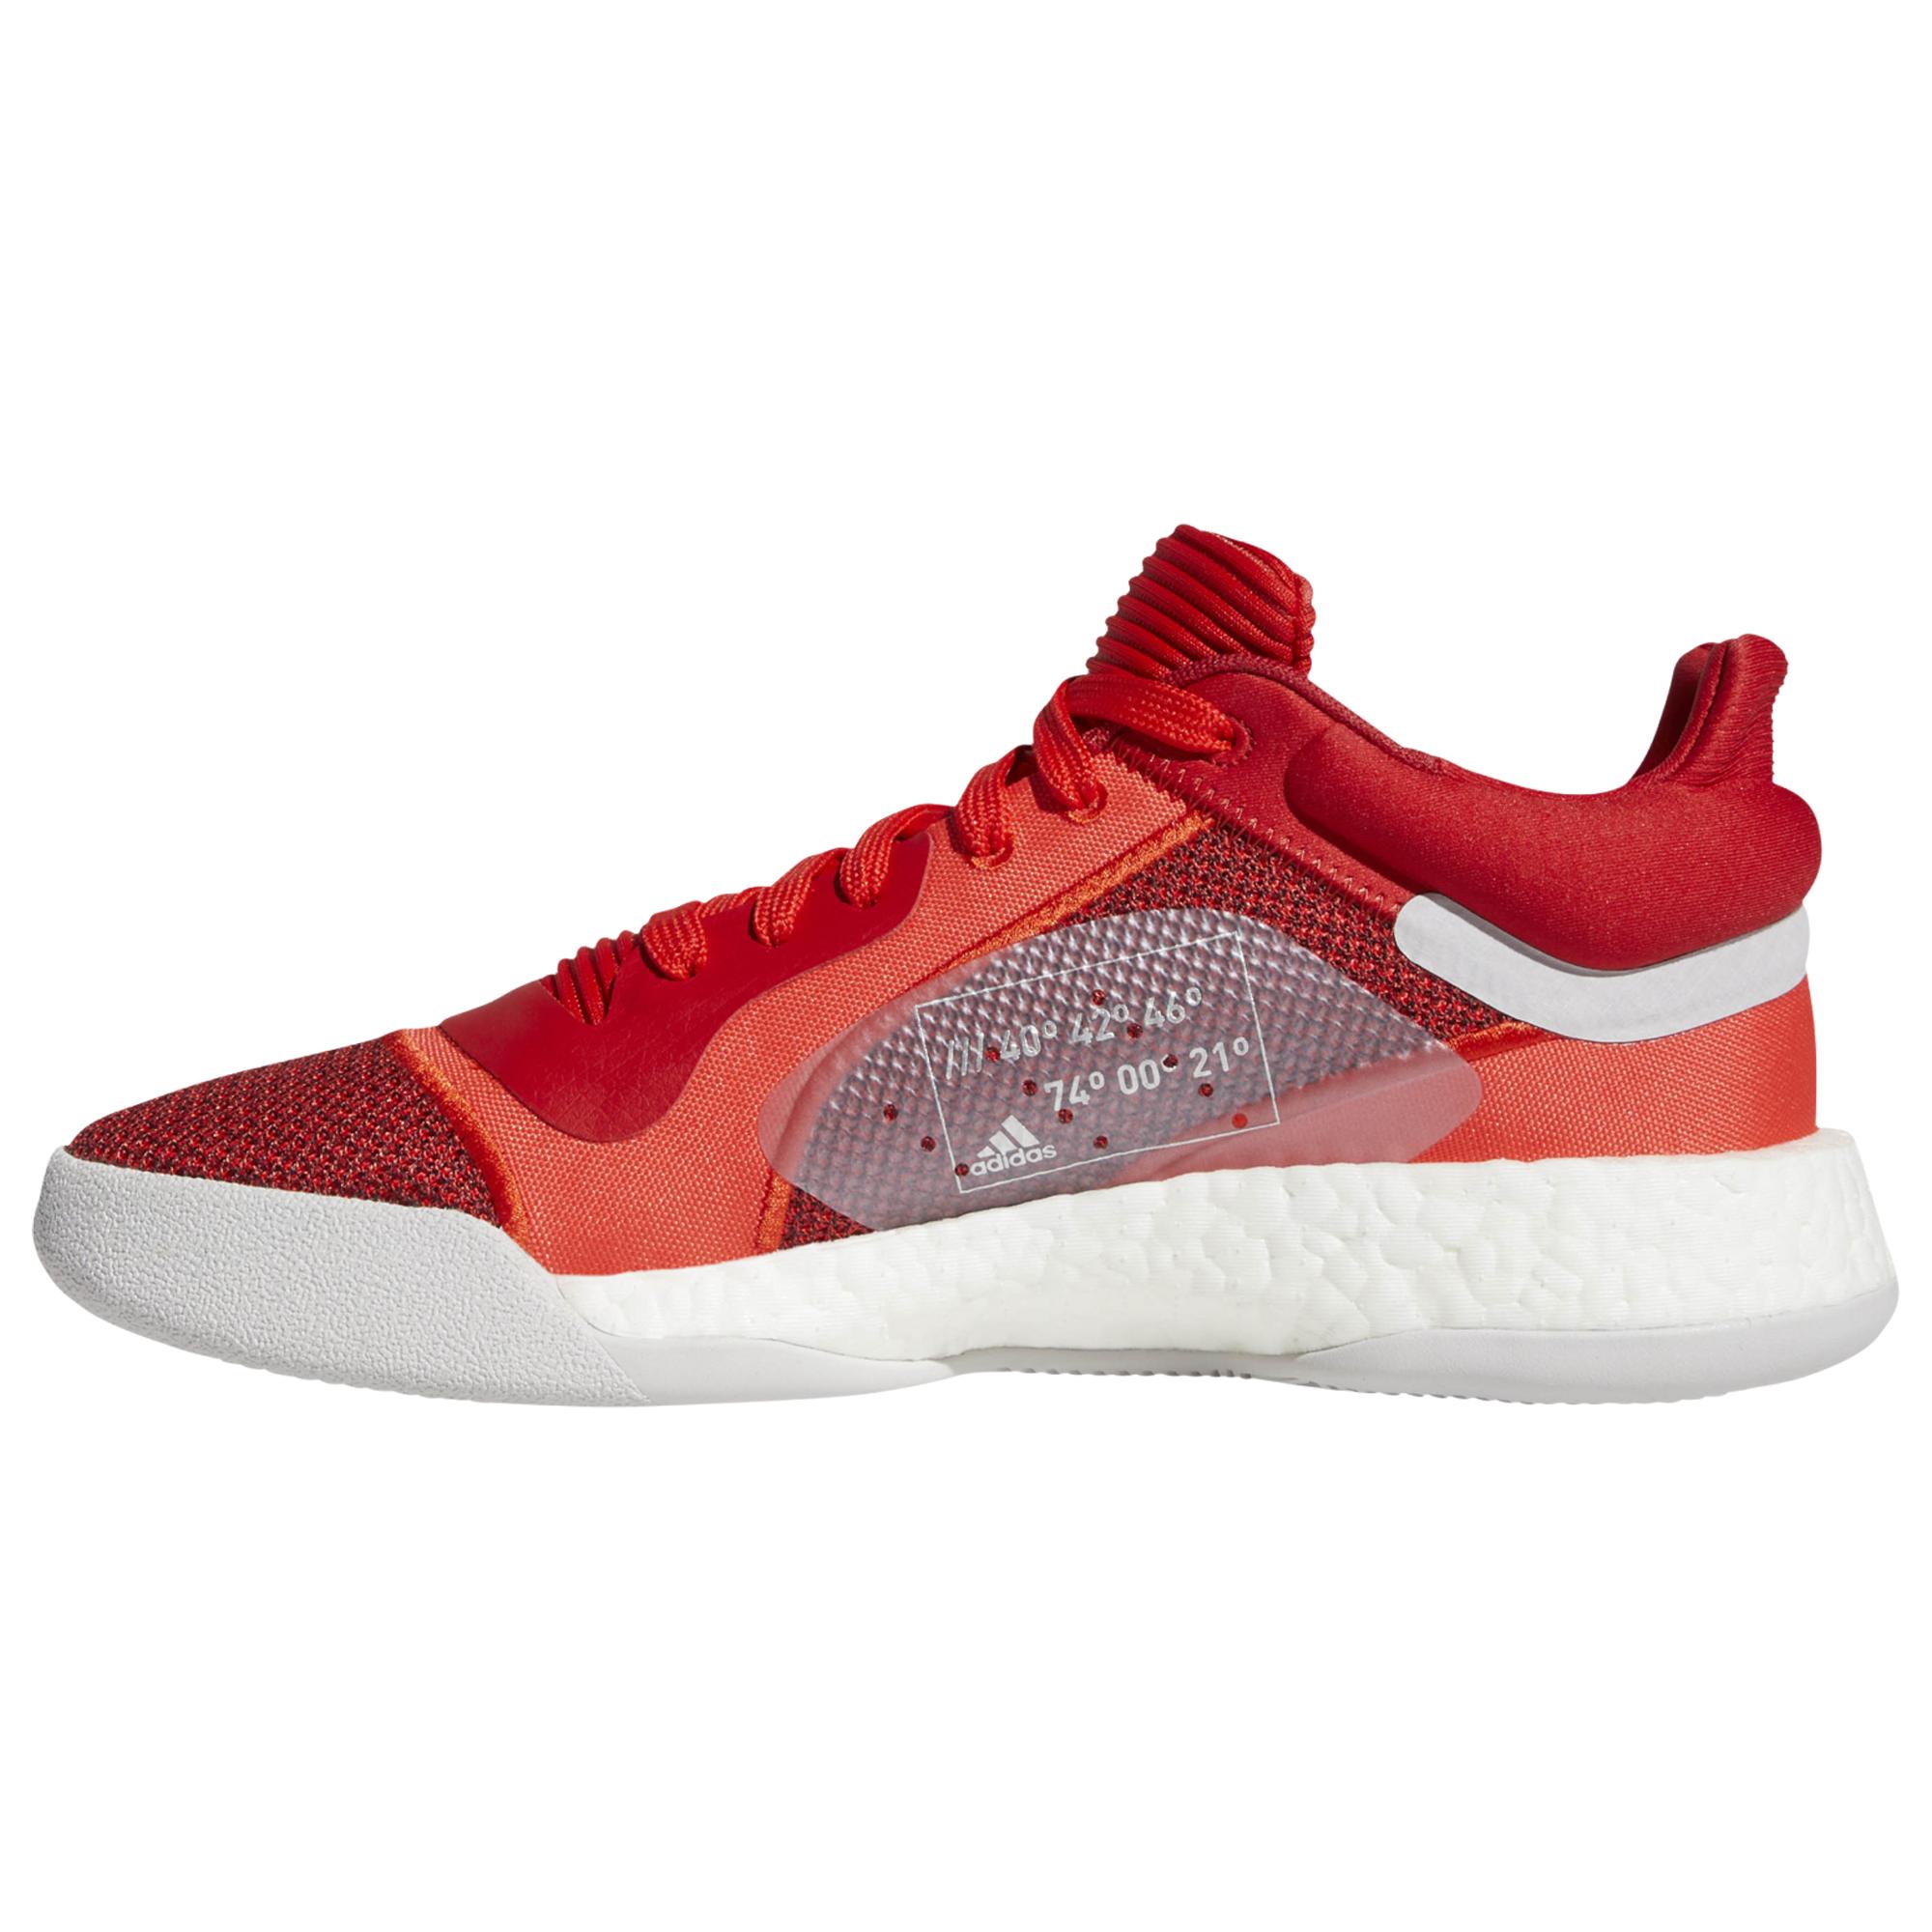 adidas Rubber Marquee Boost Low Basketball Shoes in Red for Men - Lyst